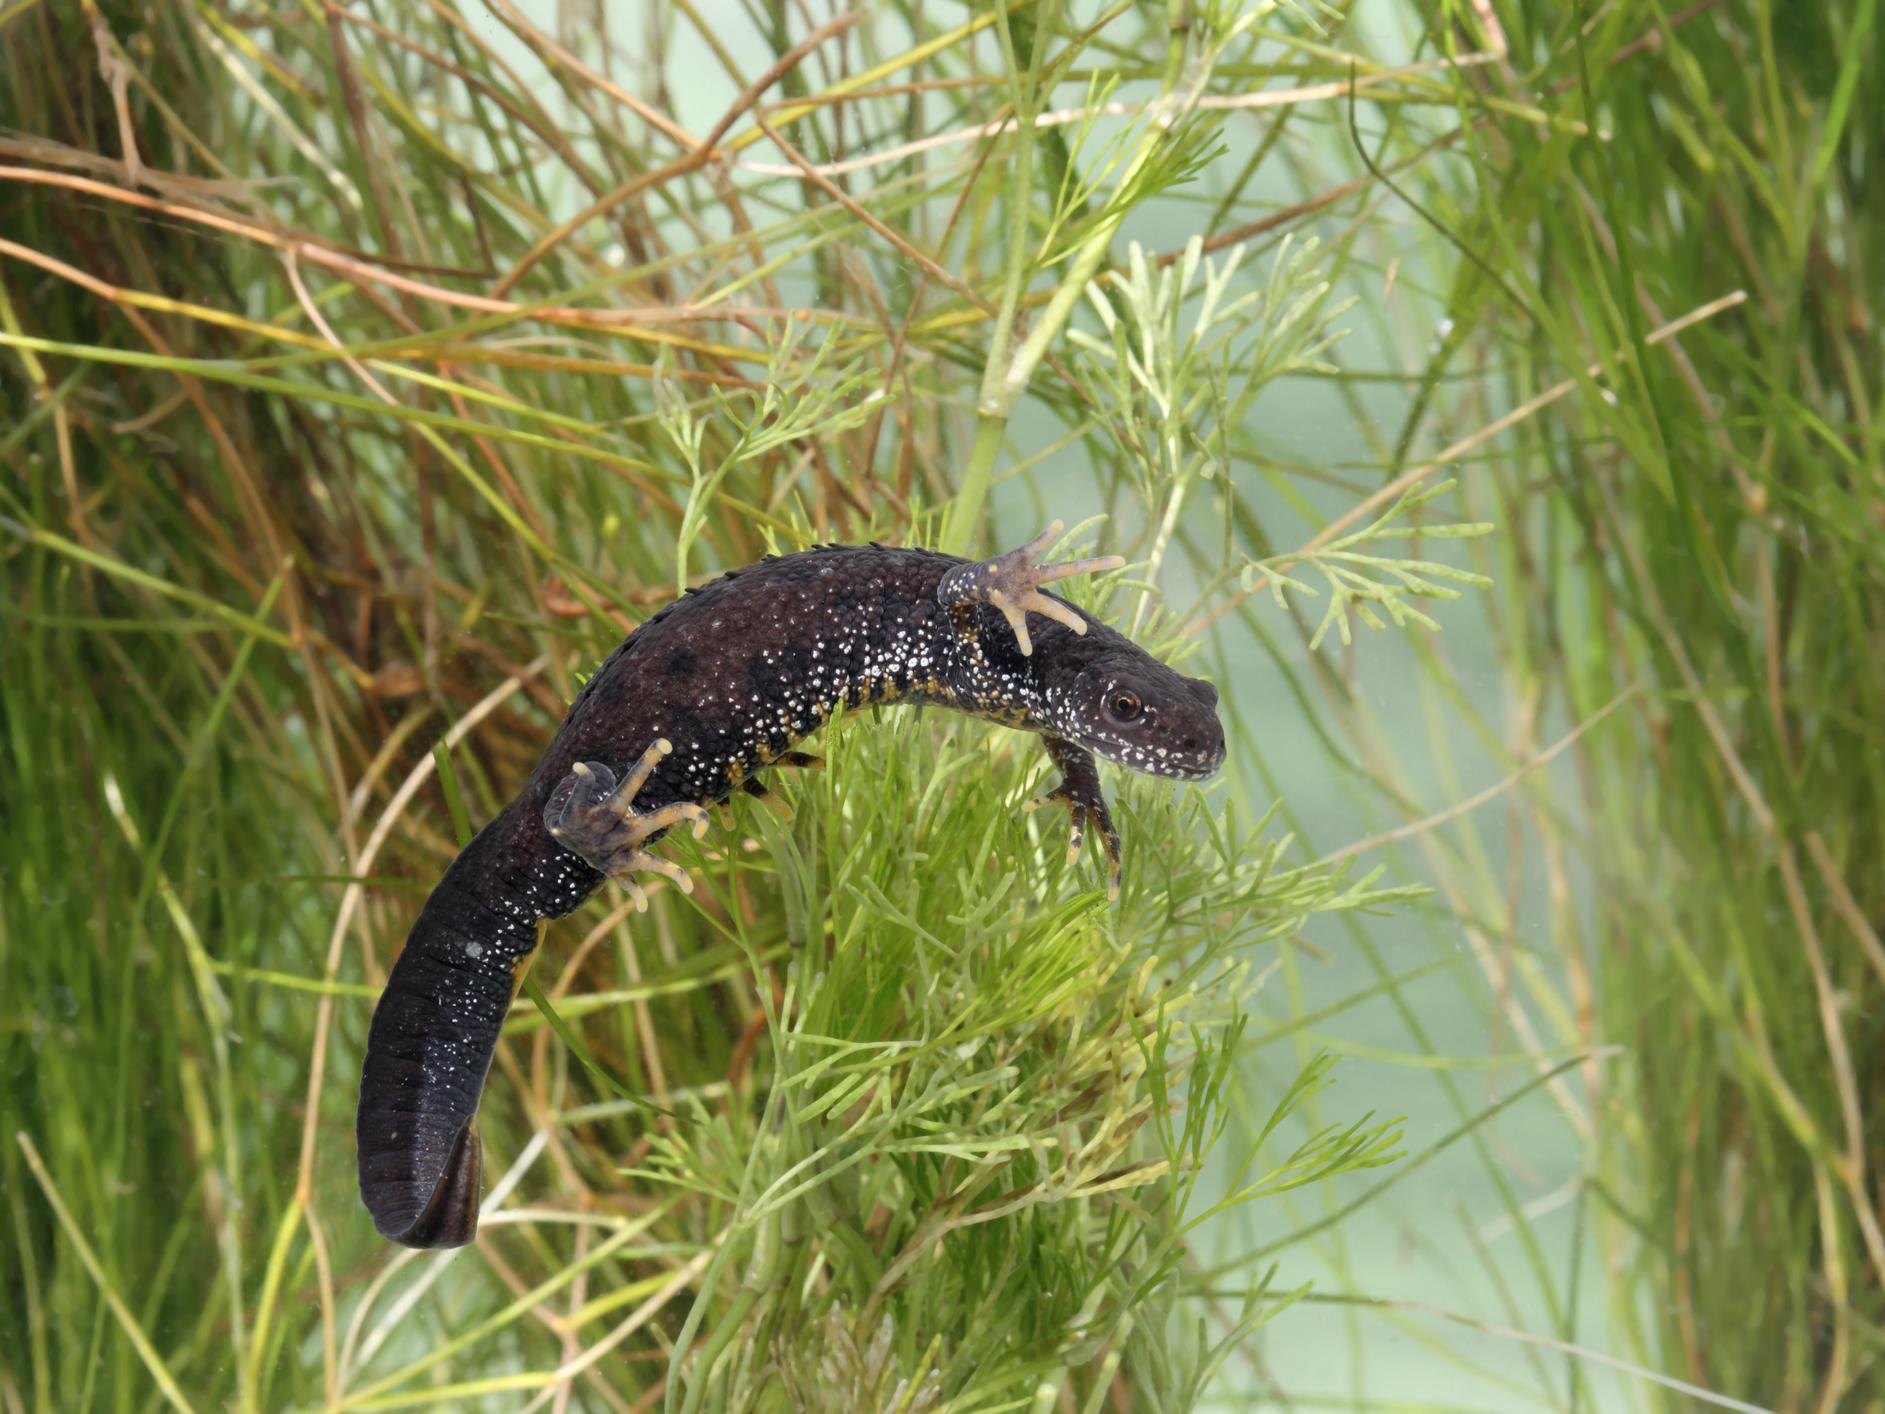 Vulnerable species like great crested newts could be decimated if deadly Bsal disease spreads from pet stocks